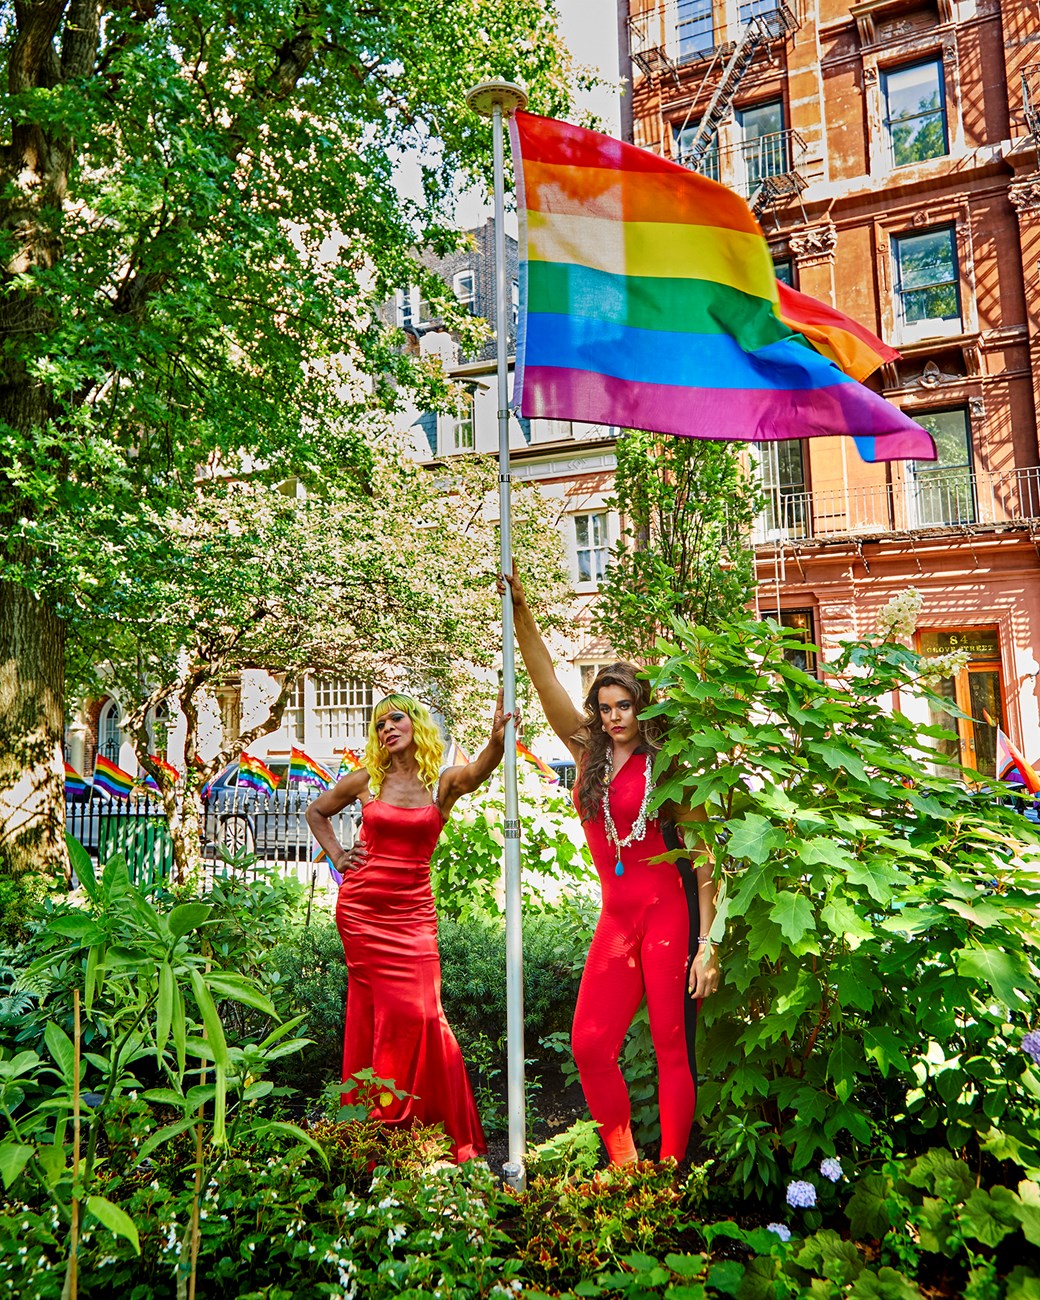 Portraits of Miss Simone and Monet at Stonewall National Monument, Miss Simone and Monet posing by a rainbow flag in a garden